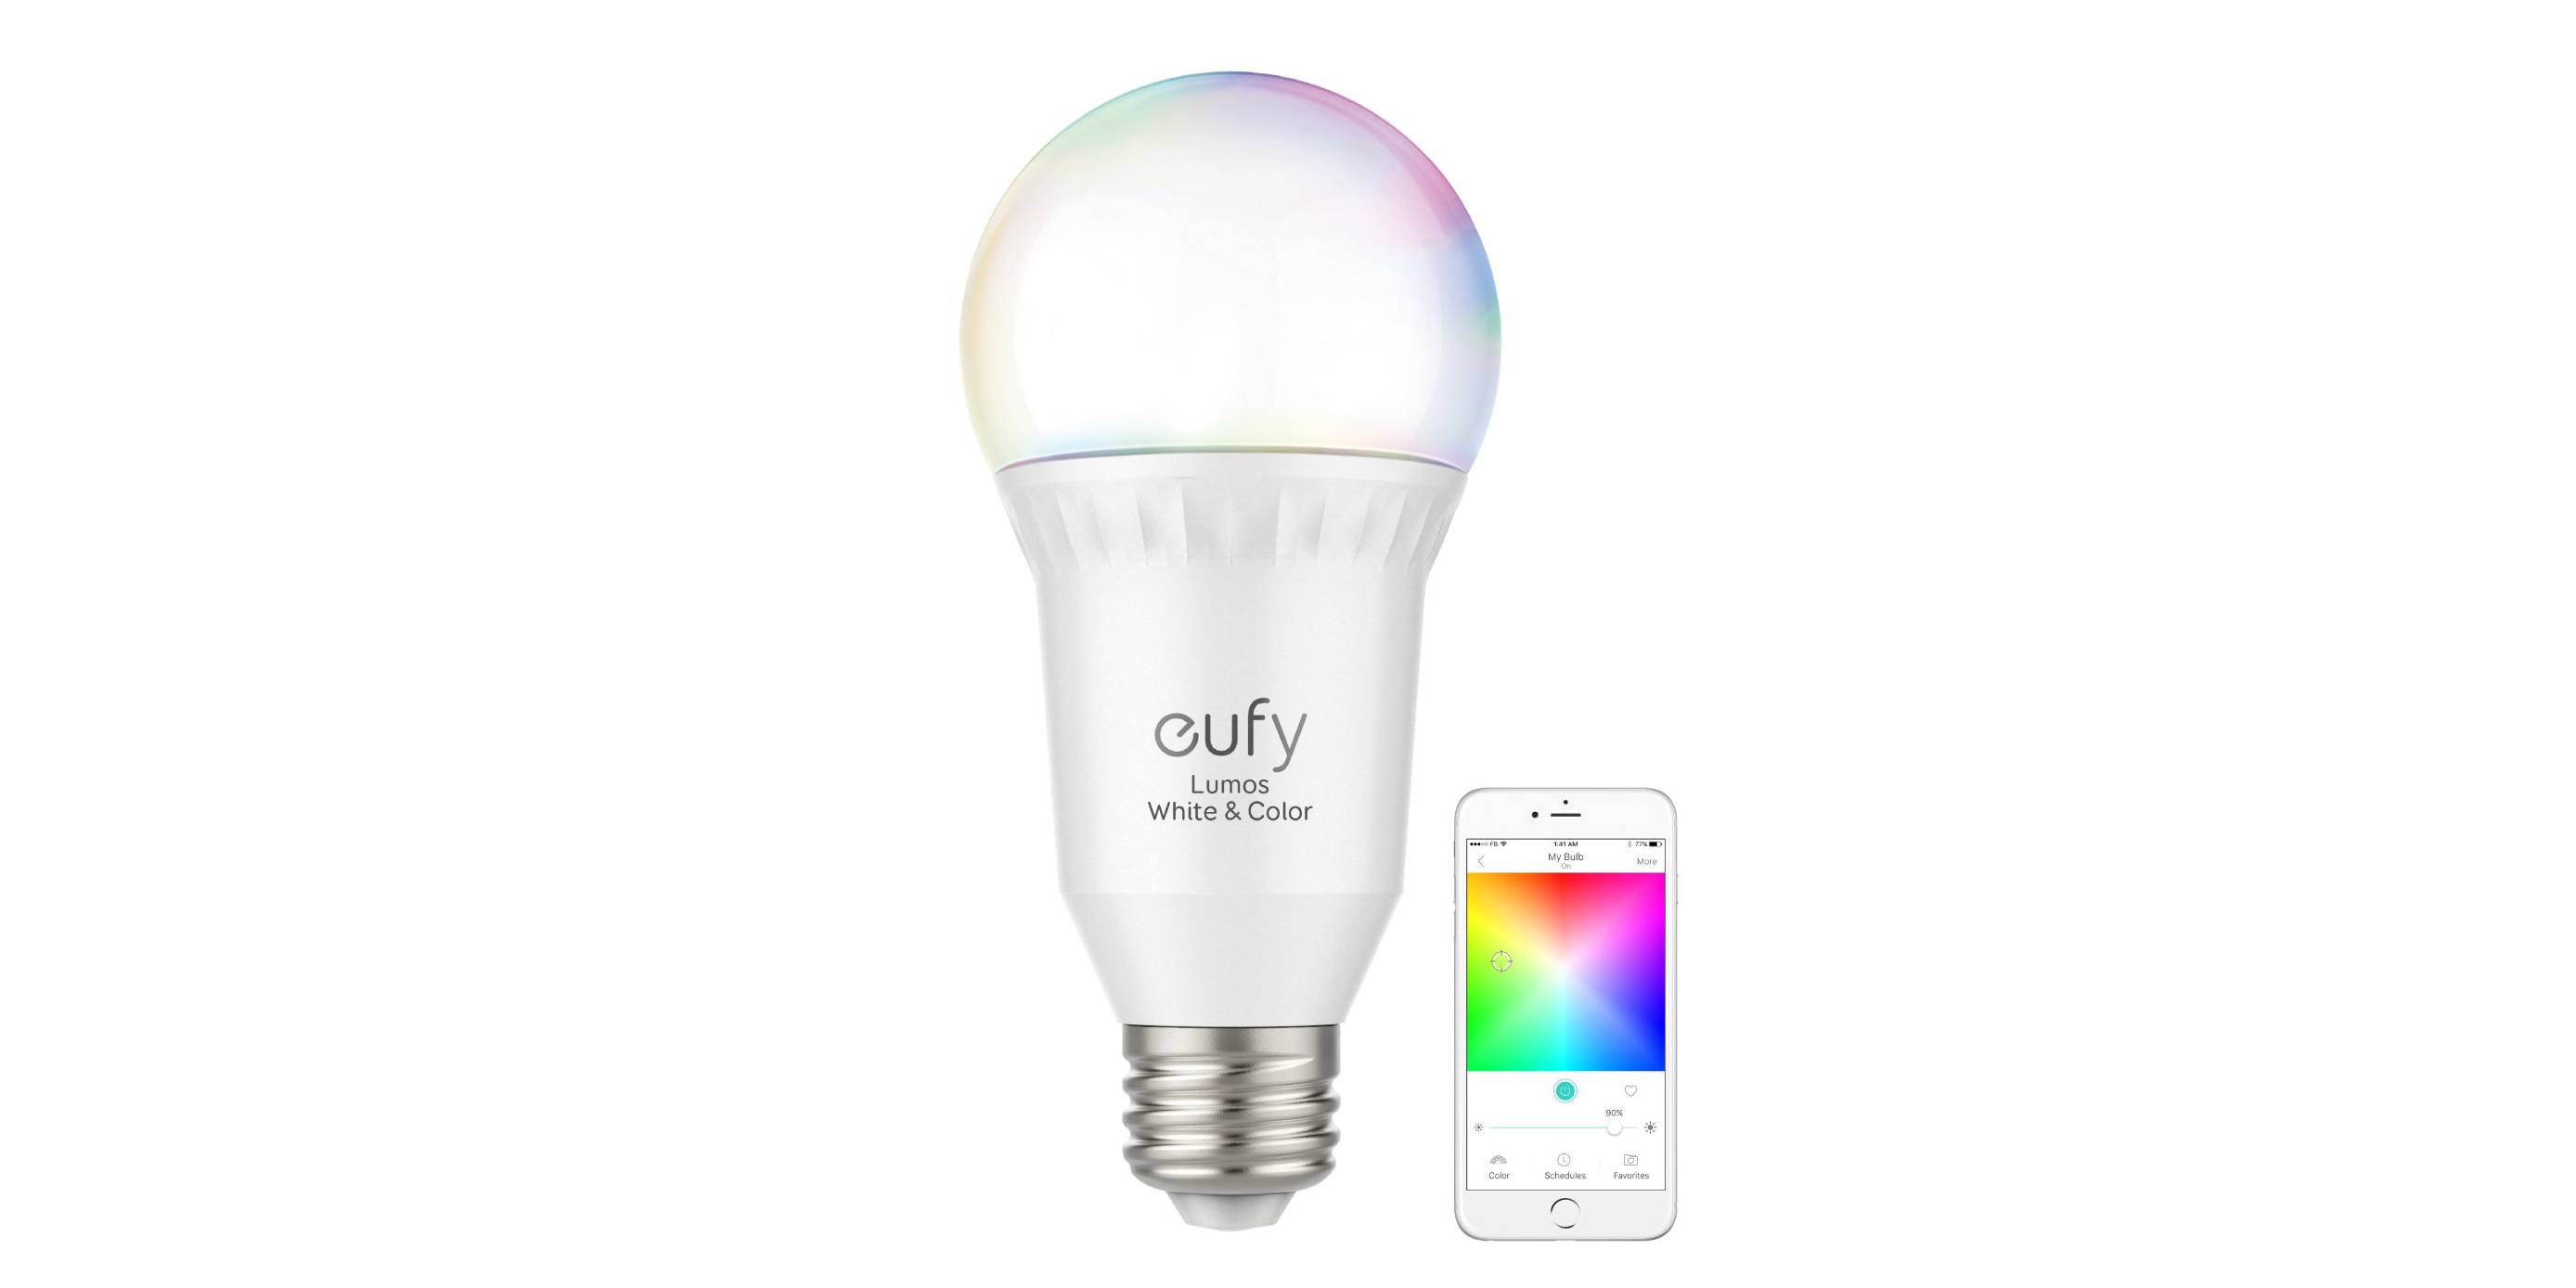 Today’s best Green Deals include Anker Eufy Smart LED Light Bulbs, more